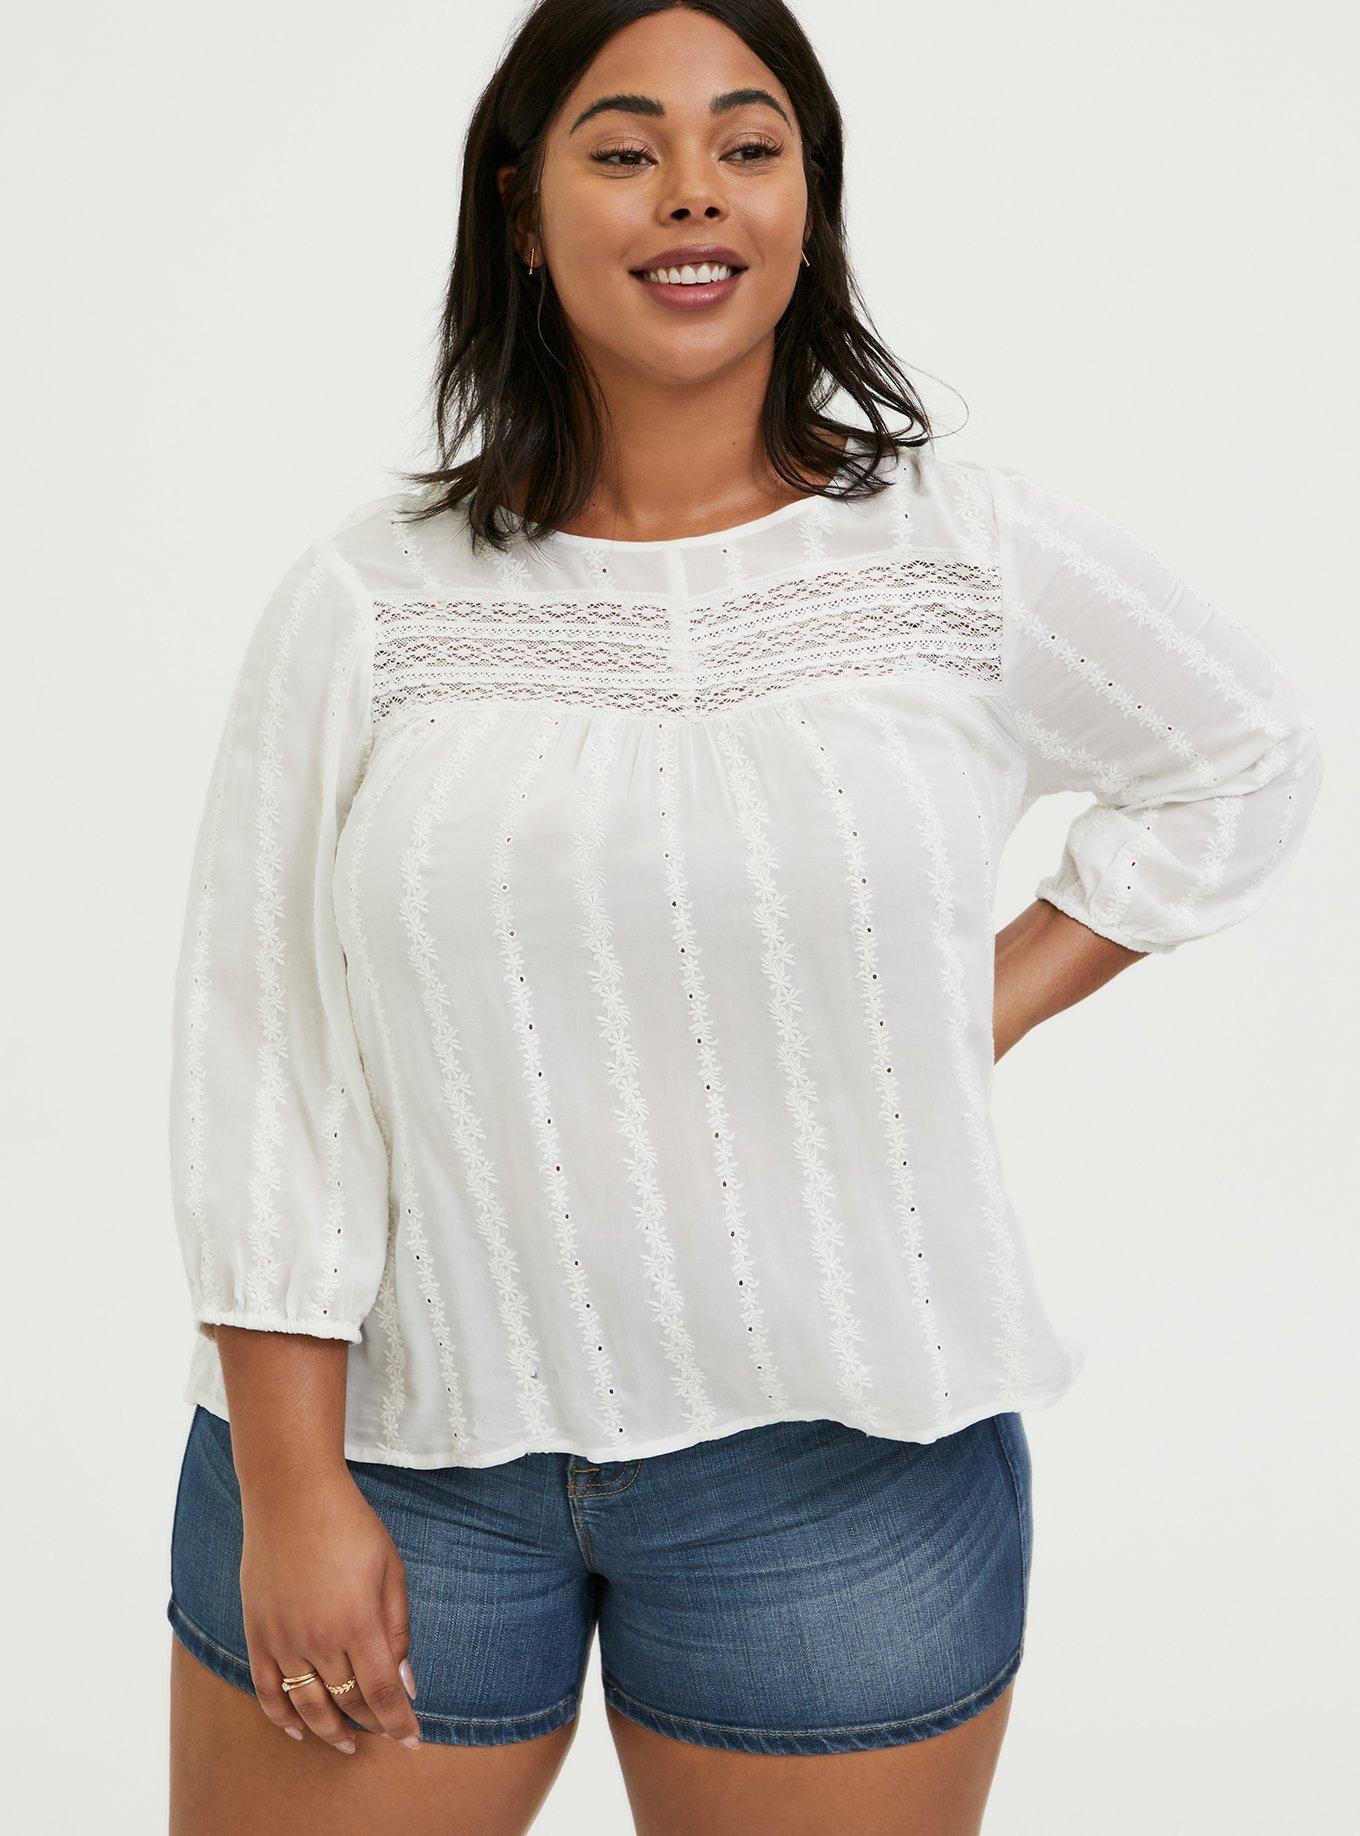 Torrid Plus Size Women's Clothing for sale in Copiague, New York